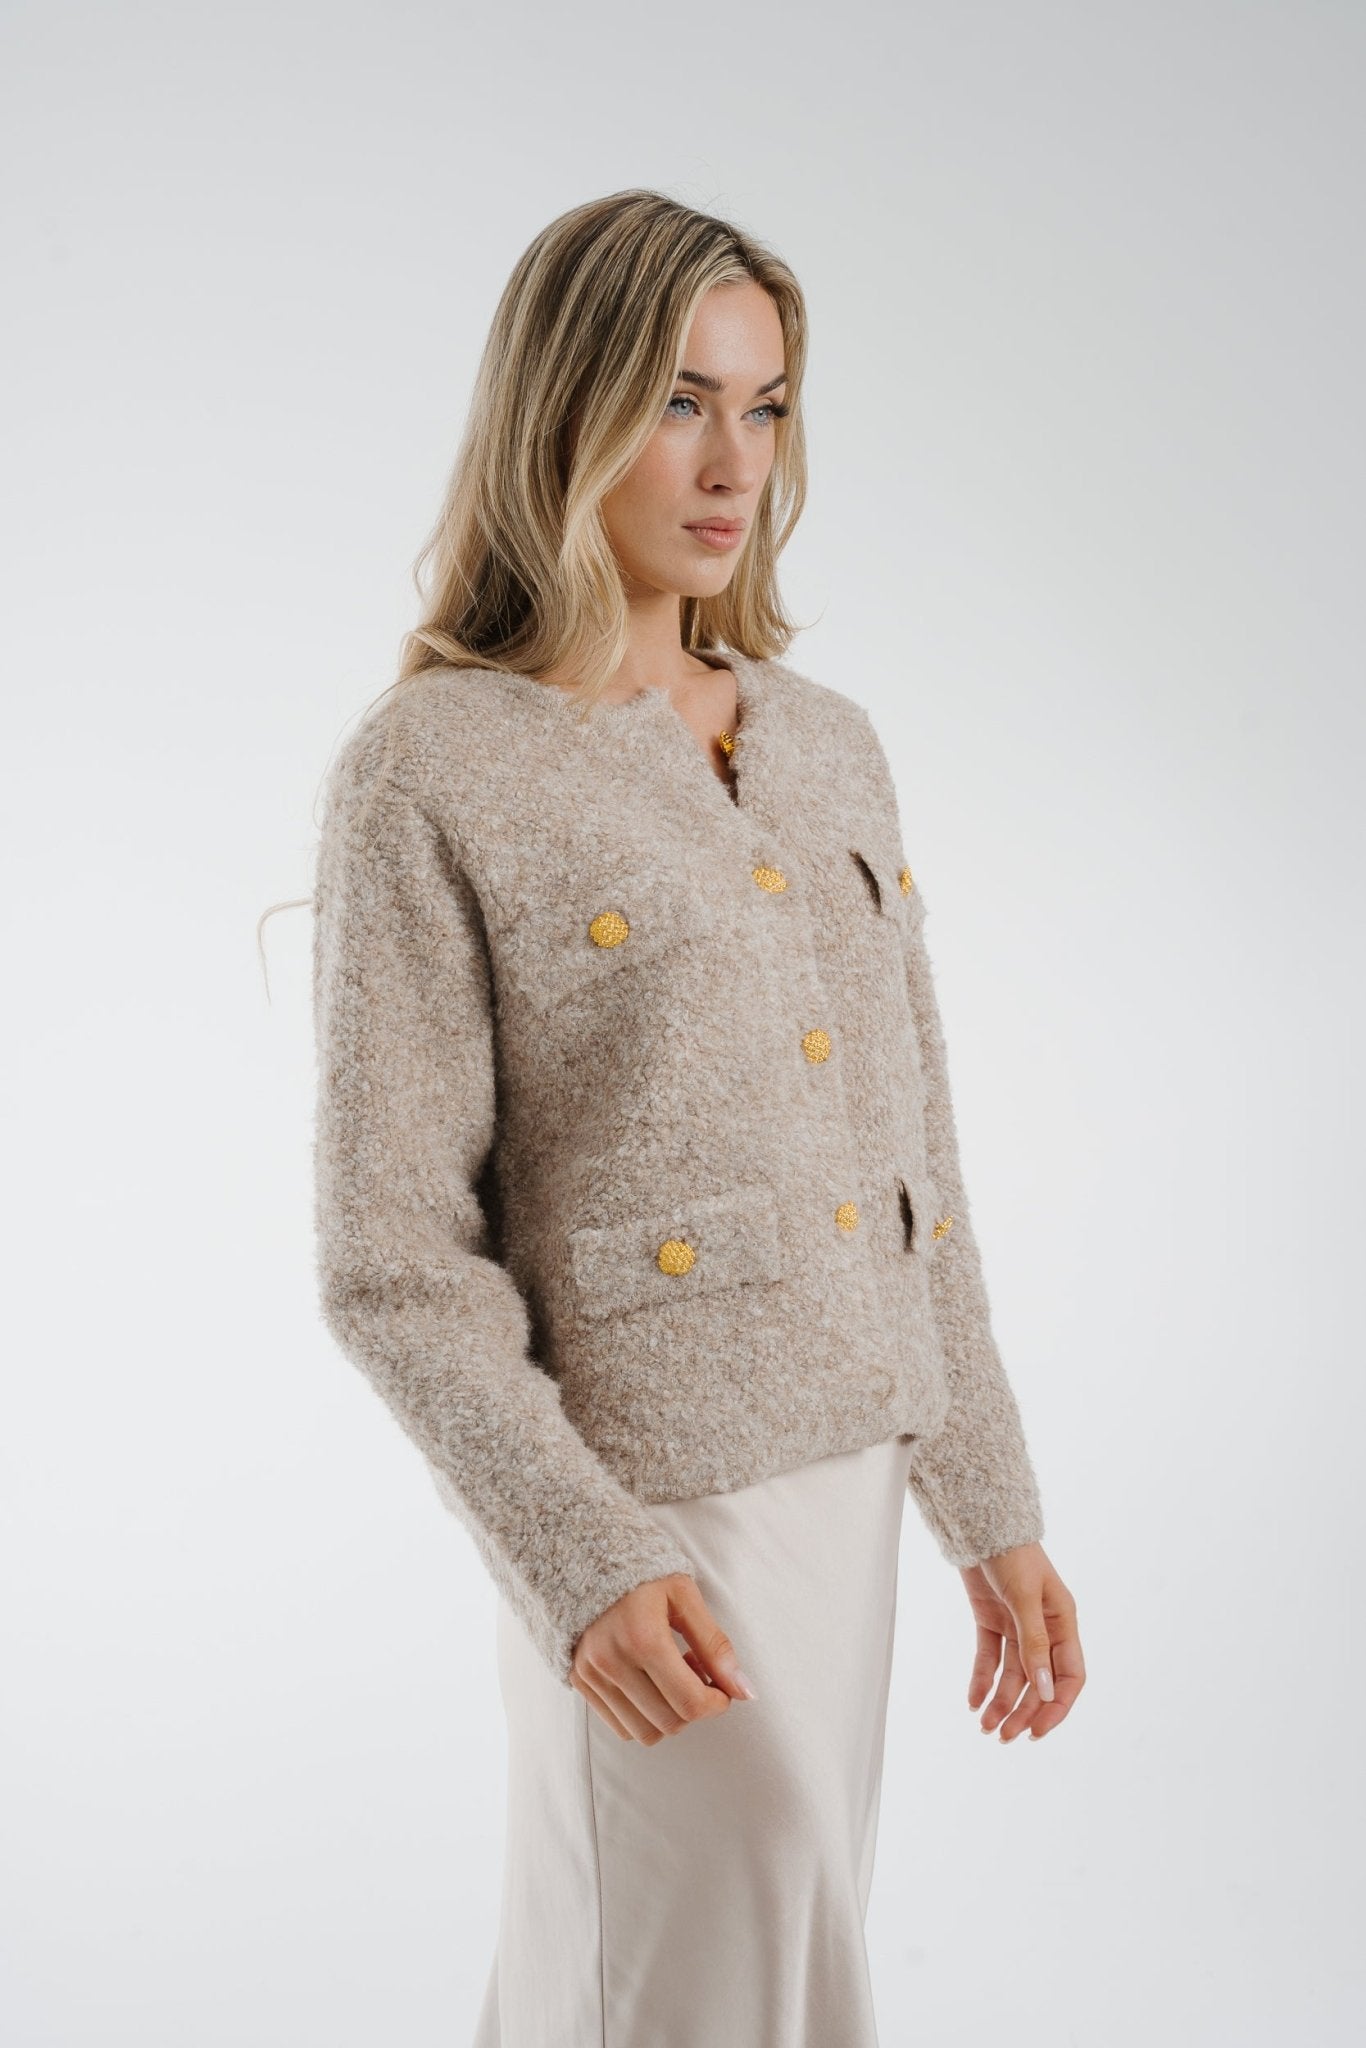 Elsa Textured Jacket In Taupe - The Walk in Wardrobe